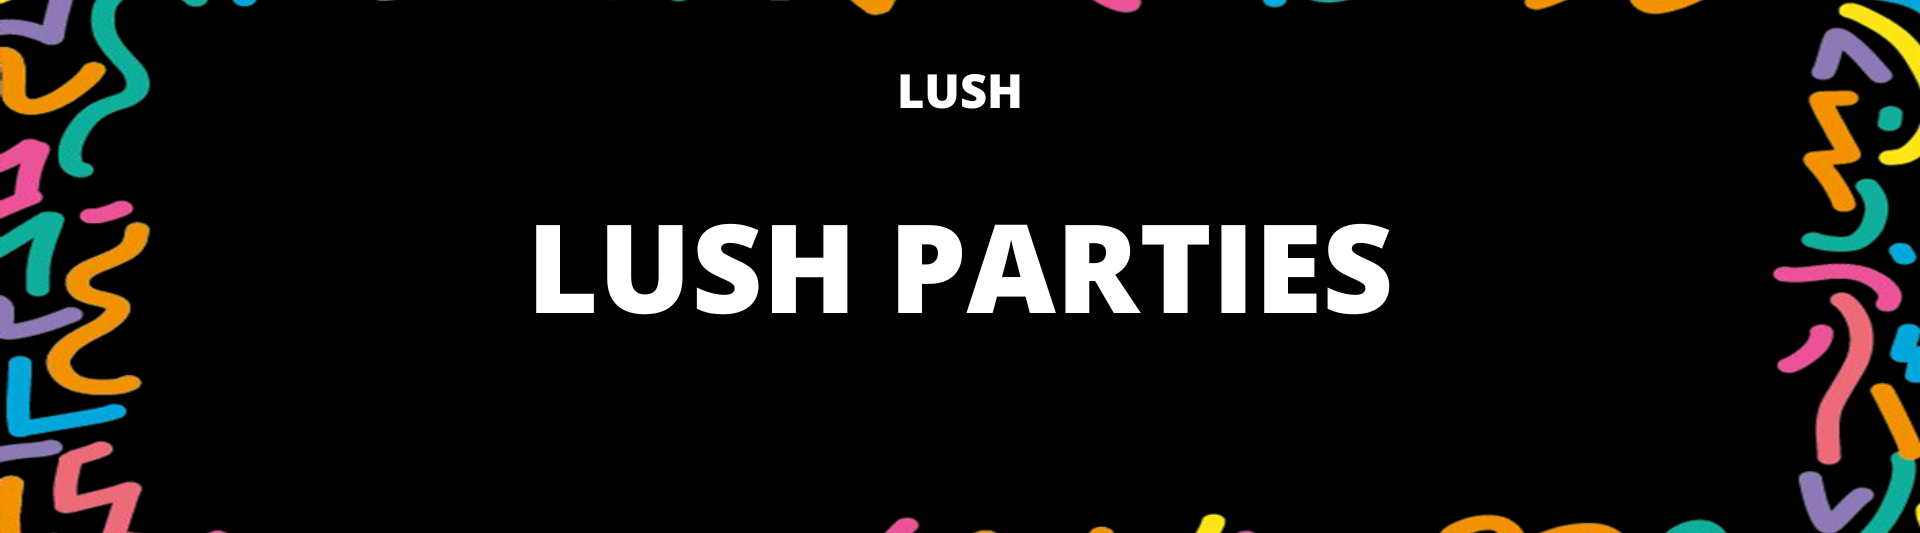 LUSH PARTIES.png